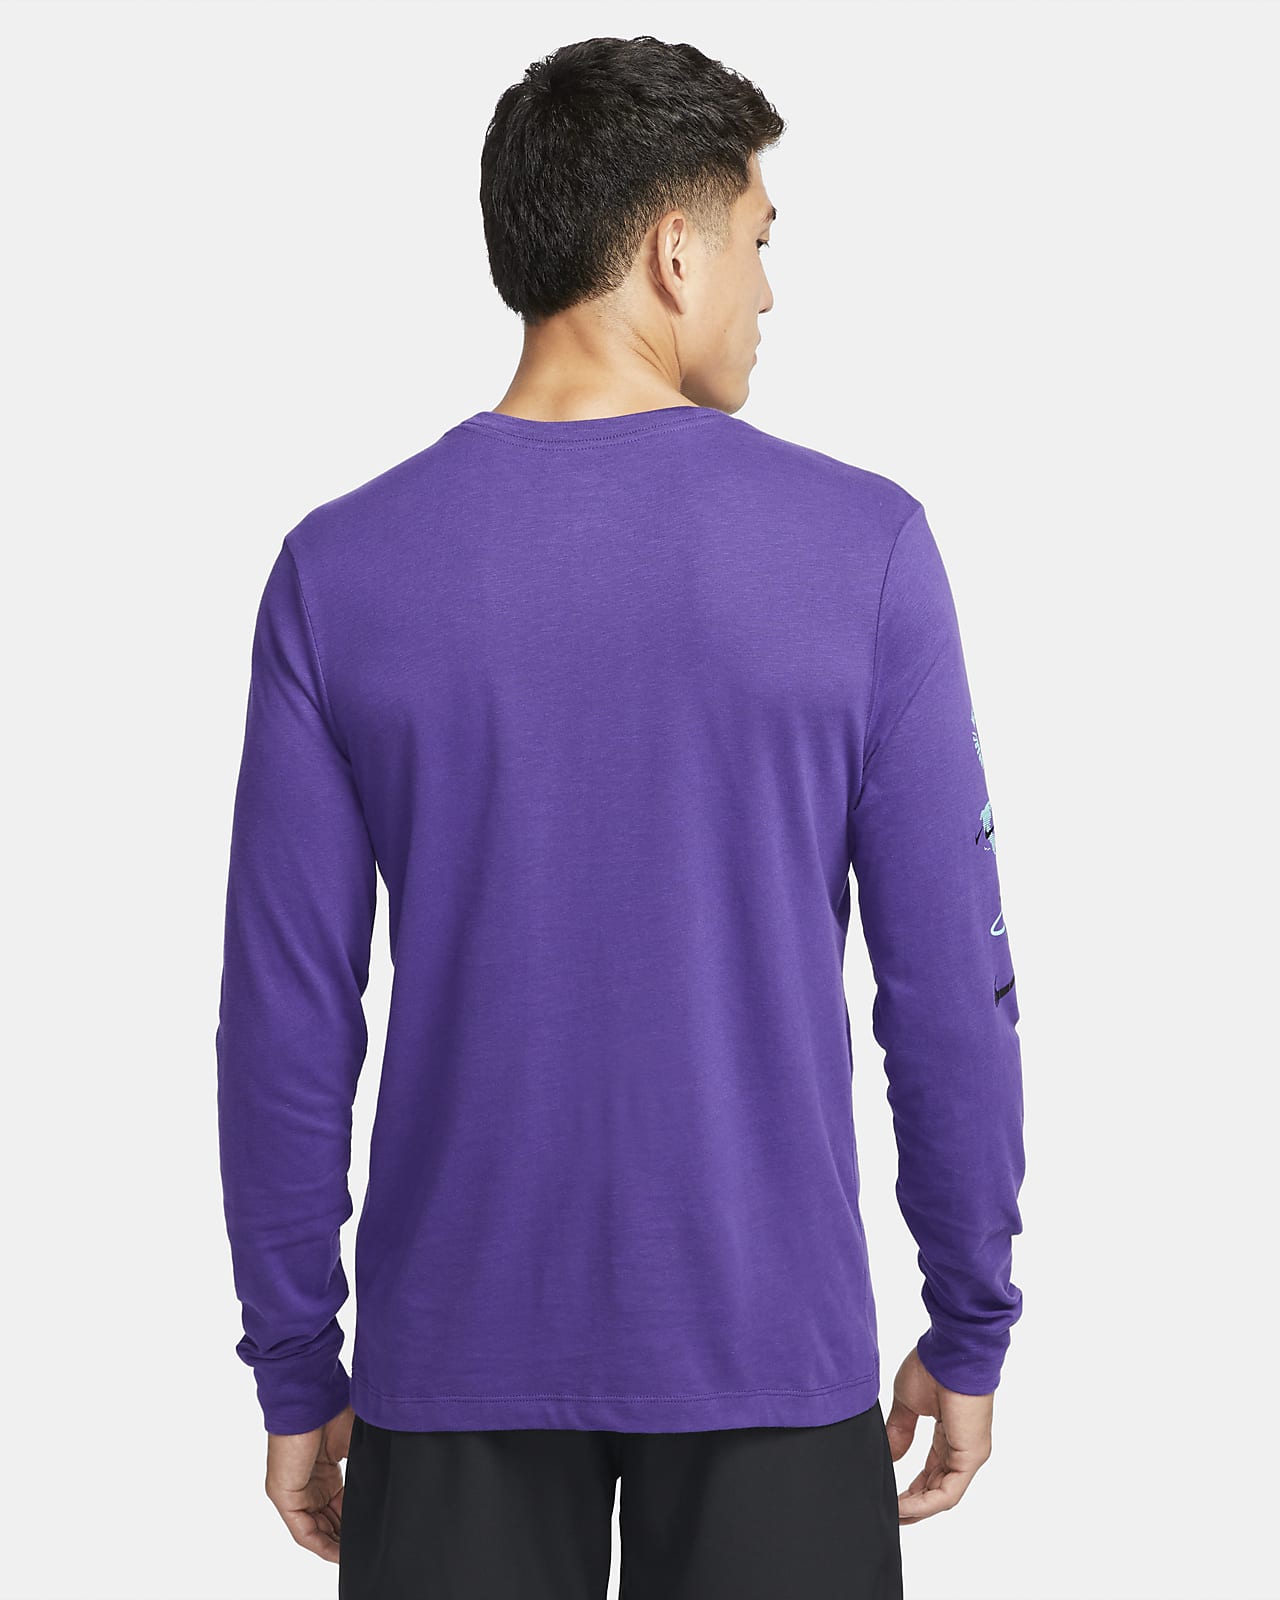 NIKE PRO COMBAT Shirt Men's M Purple Hyperwarm Compression Fitted Long  Sleeve